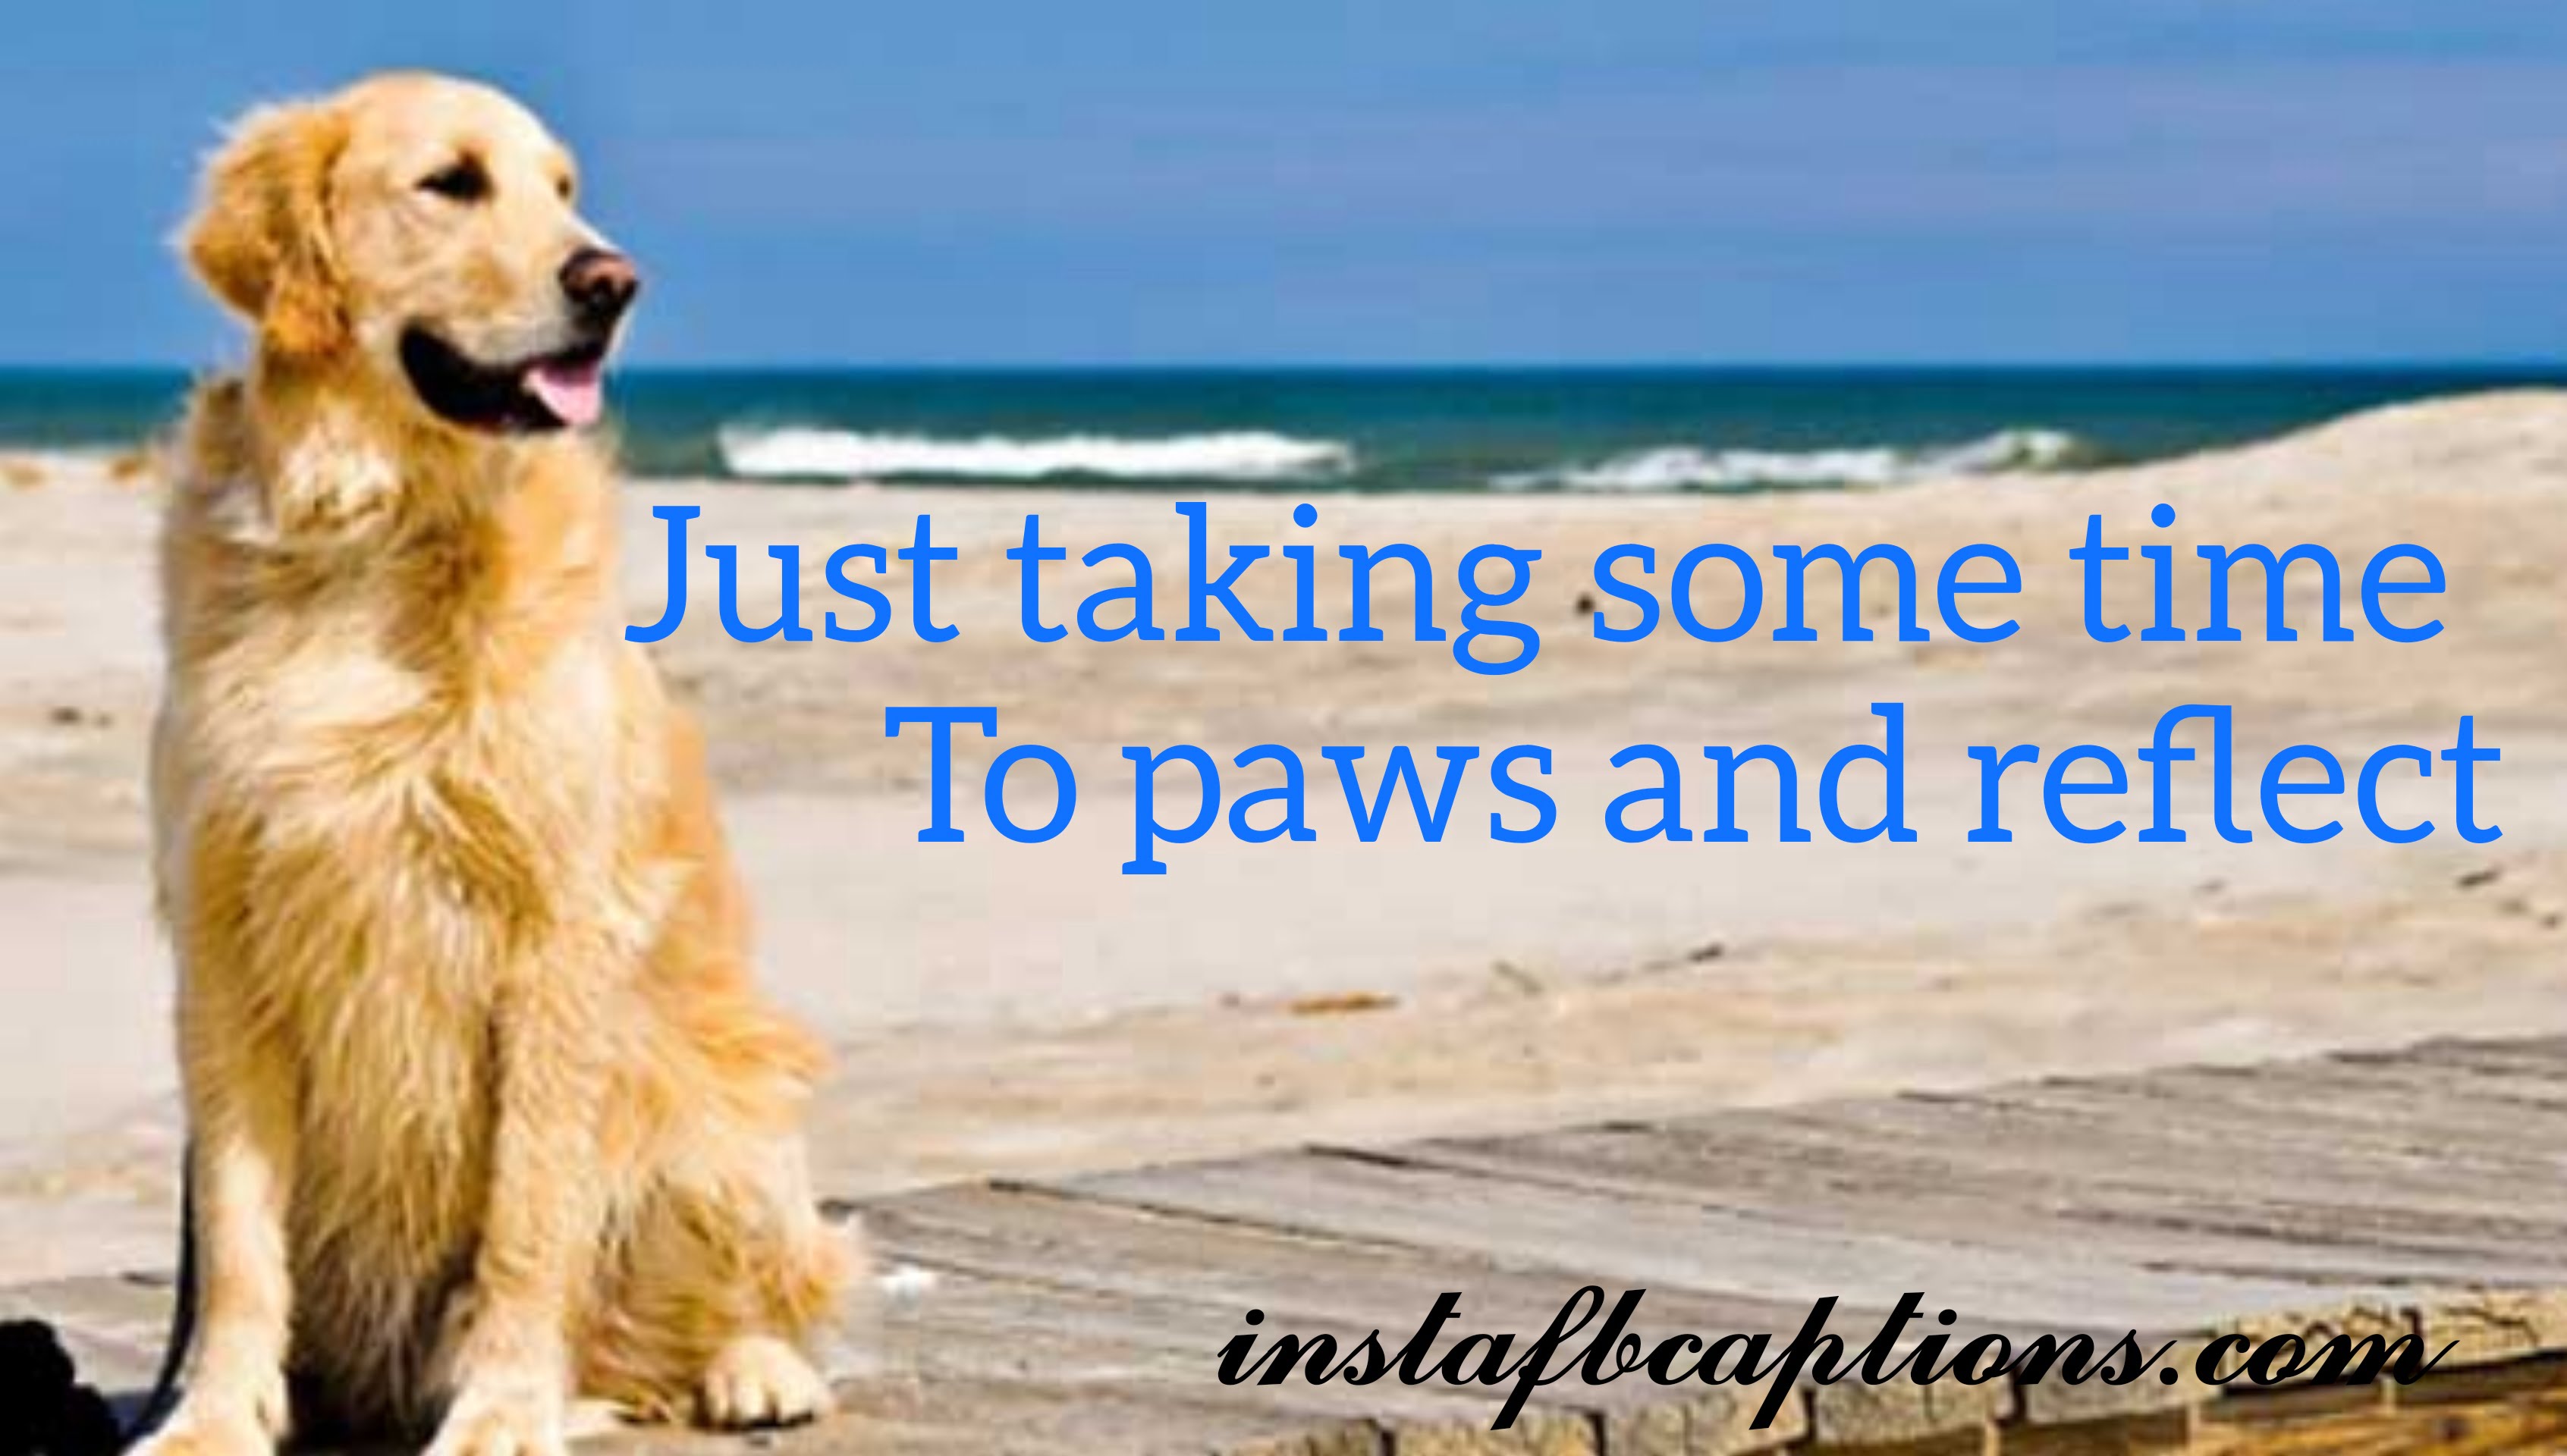 Dog On Beach Captions  - Dog on beach captions - 150+ DOG Instagram Captions for PUPPY Lovers in 2022